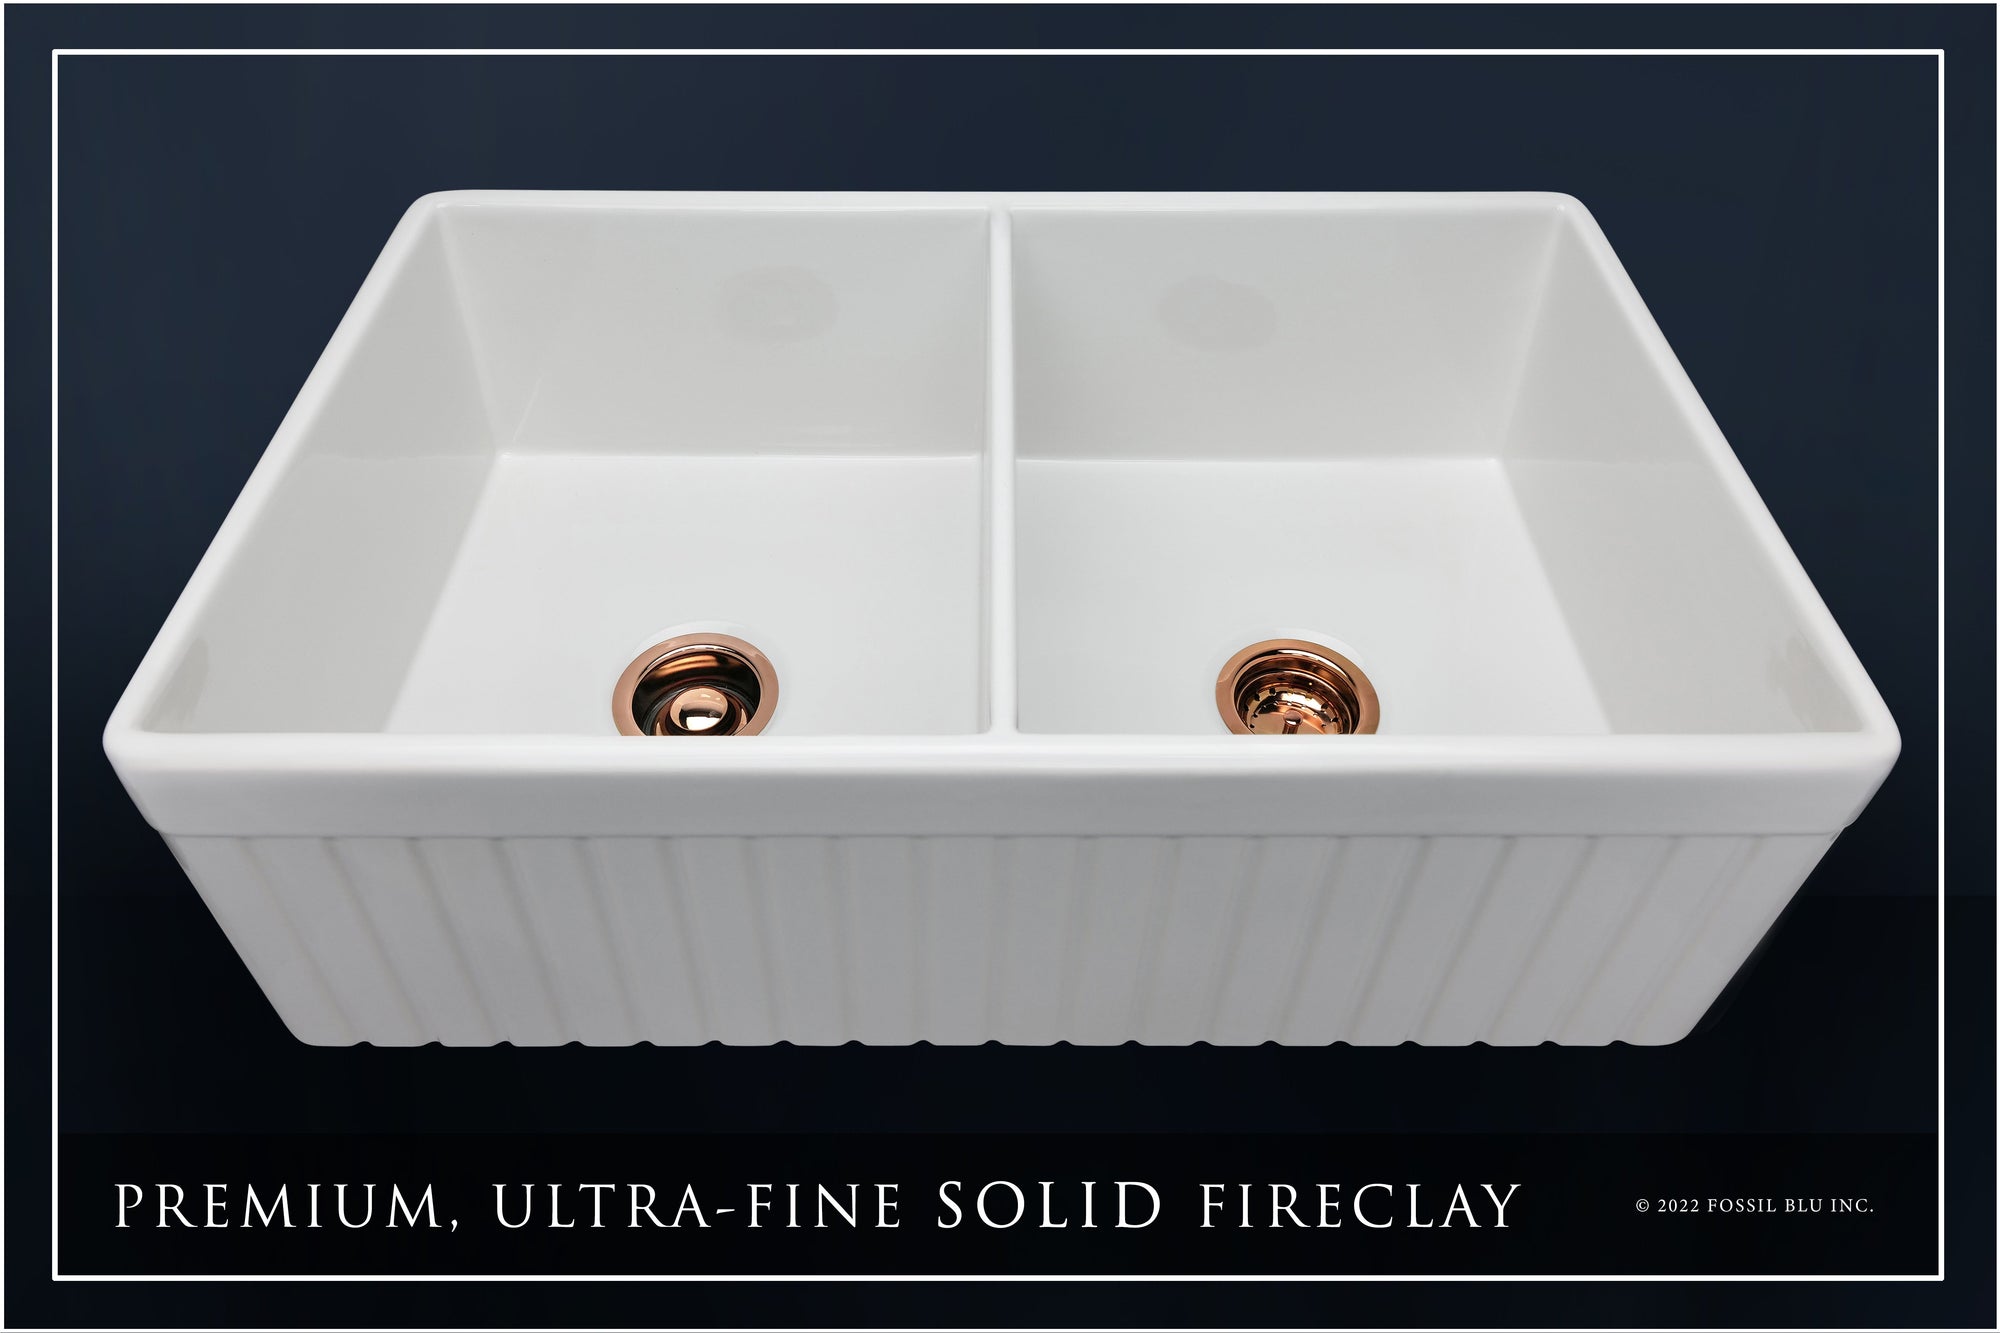 FSW1006RG LUXURY 33-INCH SOLID FIRECLAY FARMHOUSE SINK IN WHITE, POL. ROSE GOLD ACCS, FLUTED FRONT